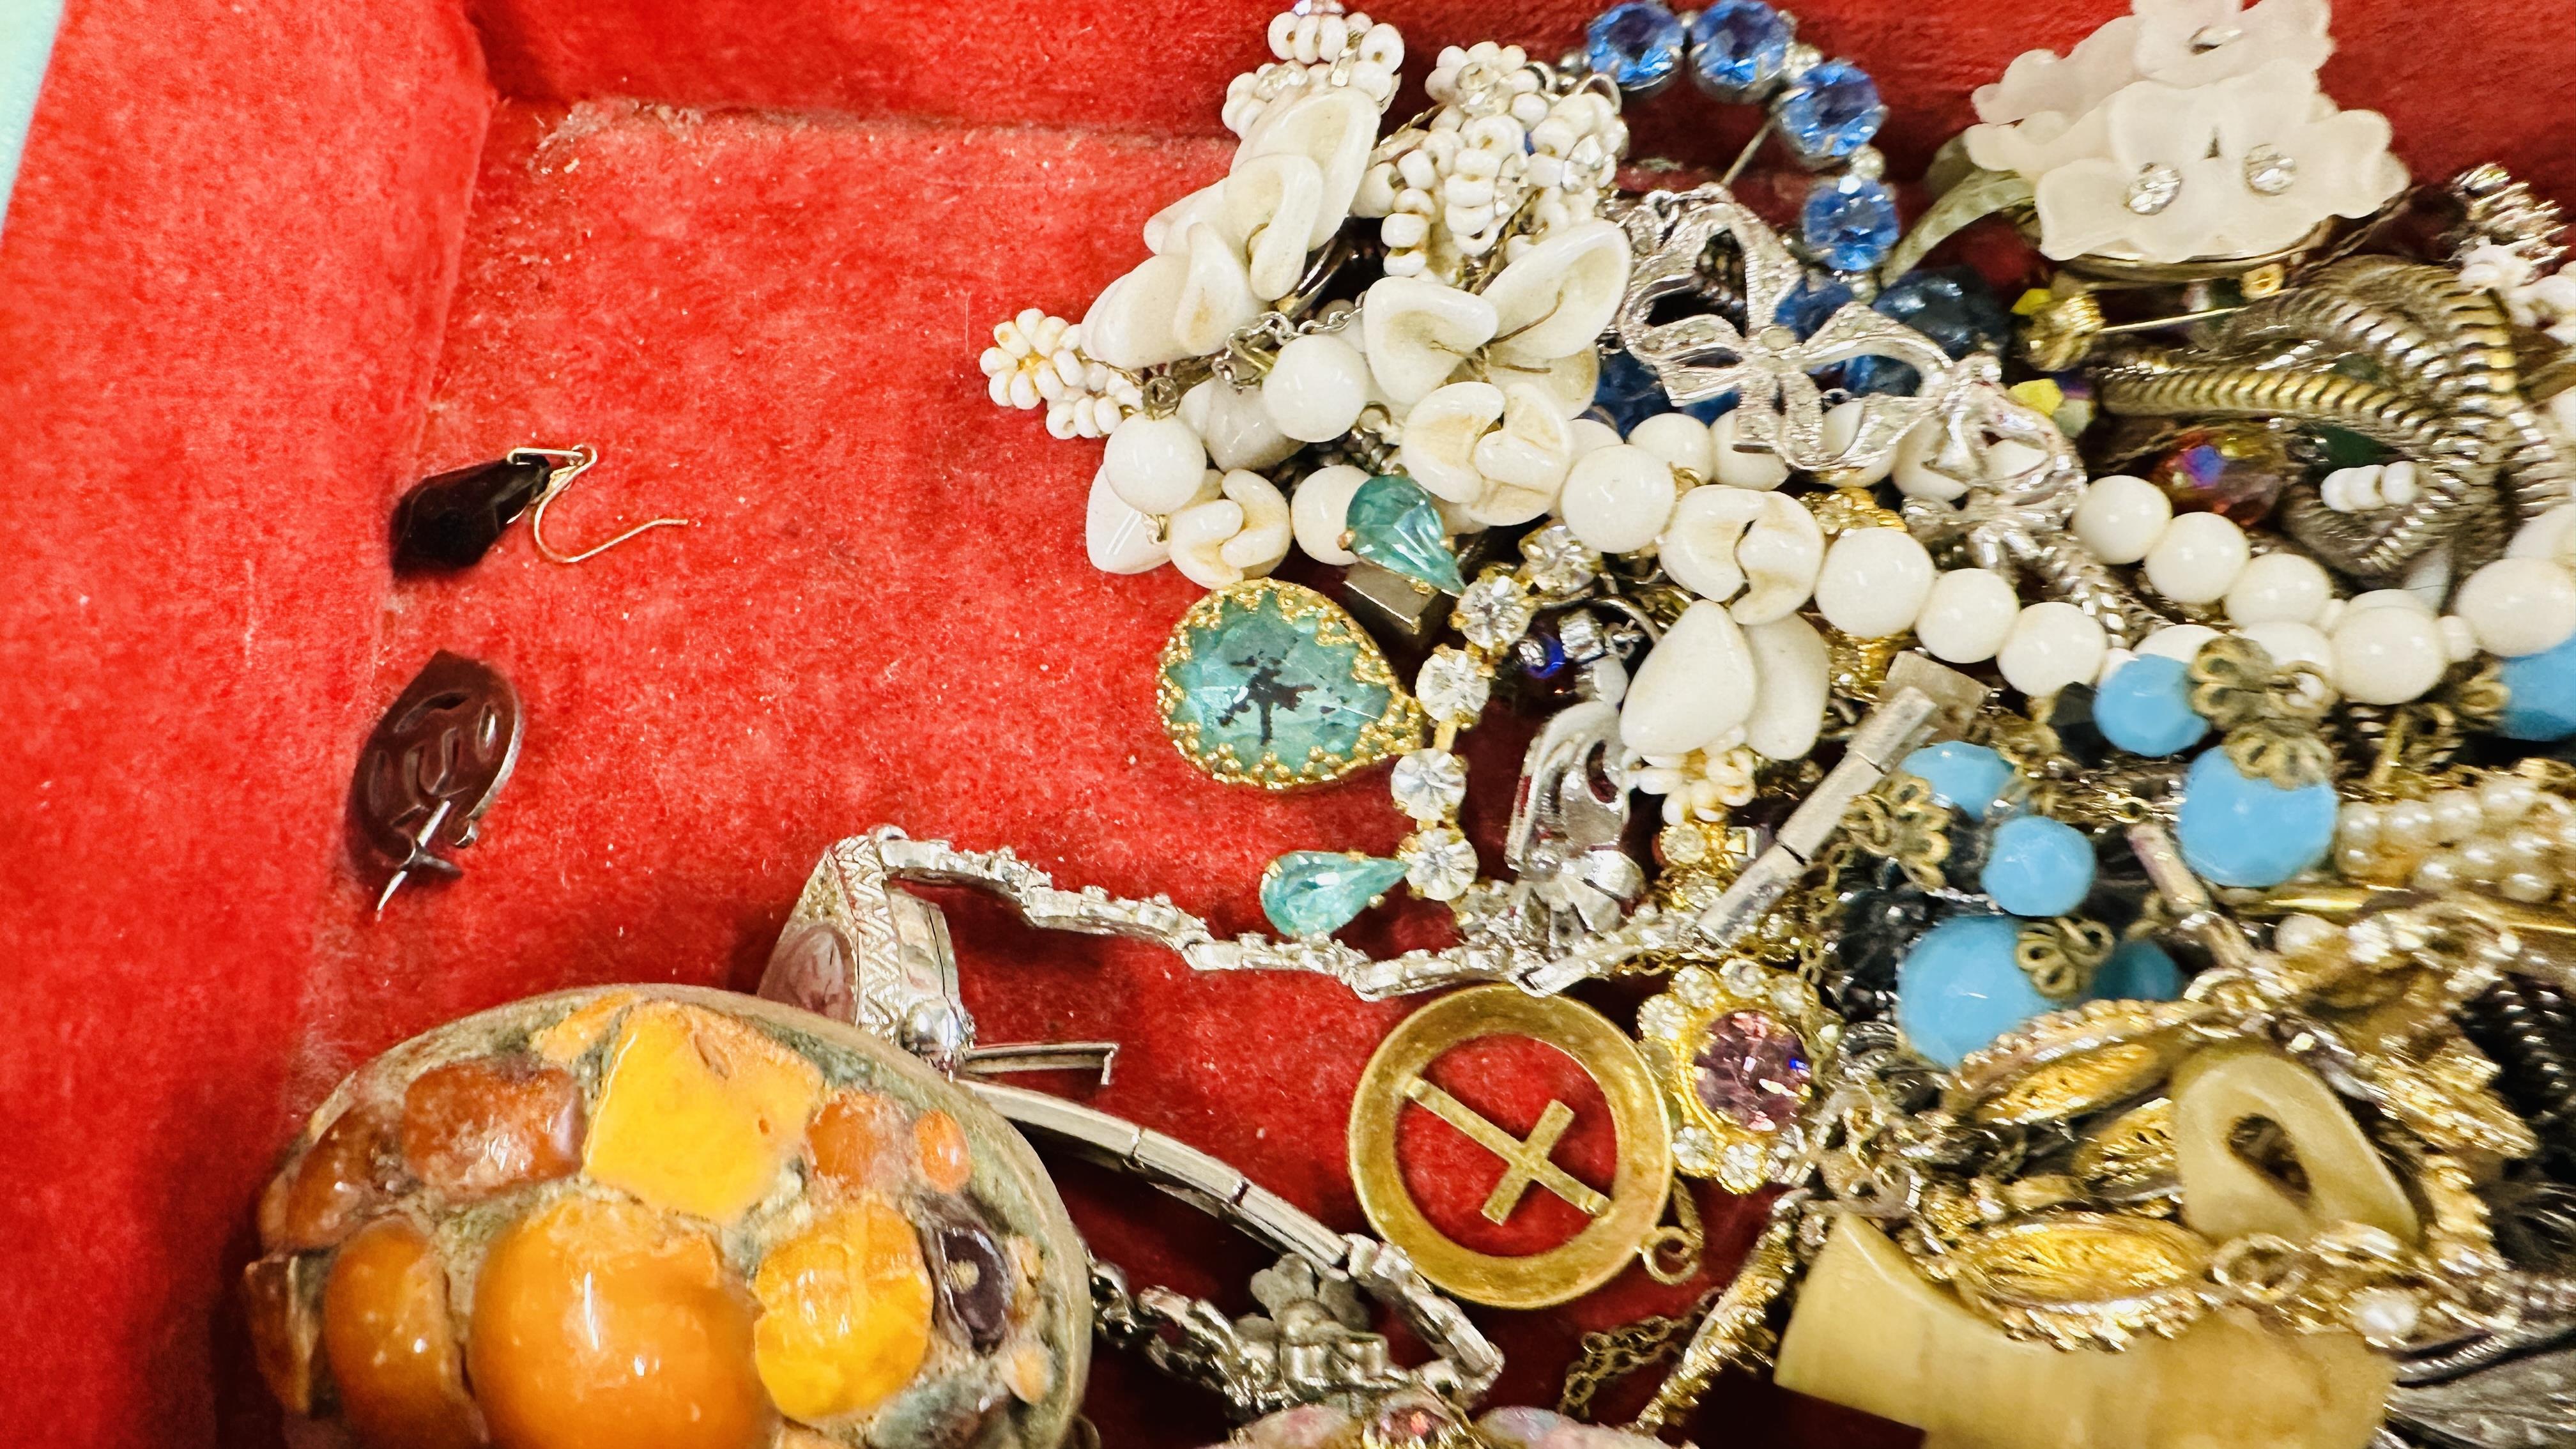 A VINTAGE JEWELLERY BOX WITH MOSAIC BRACELET, BROOCHES, NECKLACES AND A MARCASITE WATCH. - Image 8 of 8